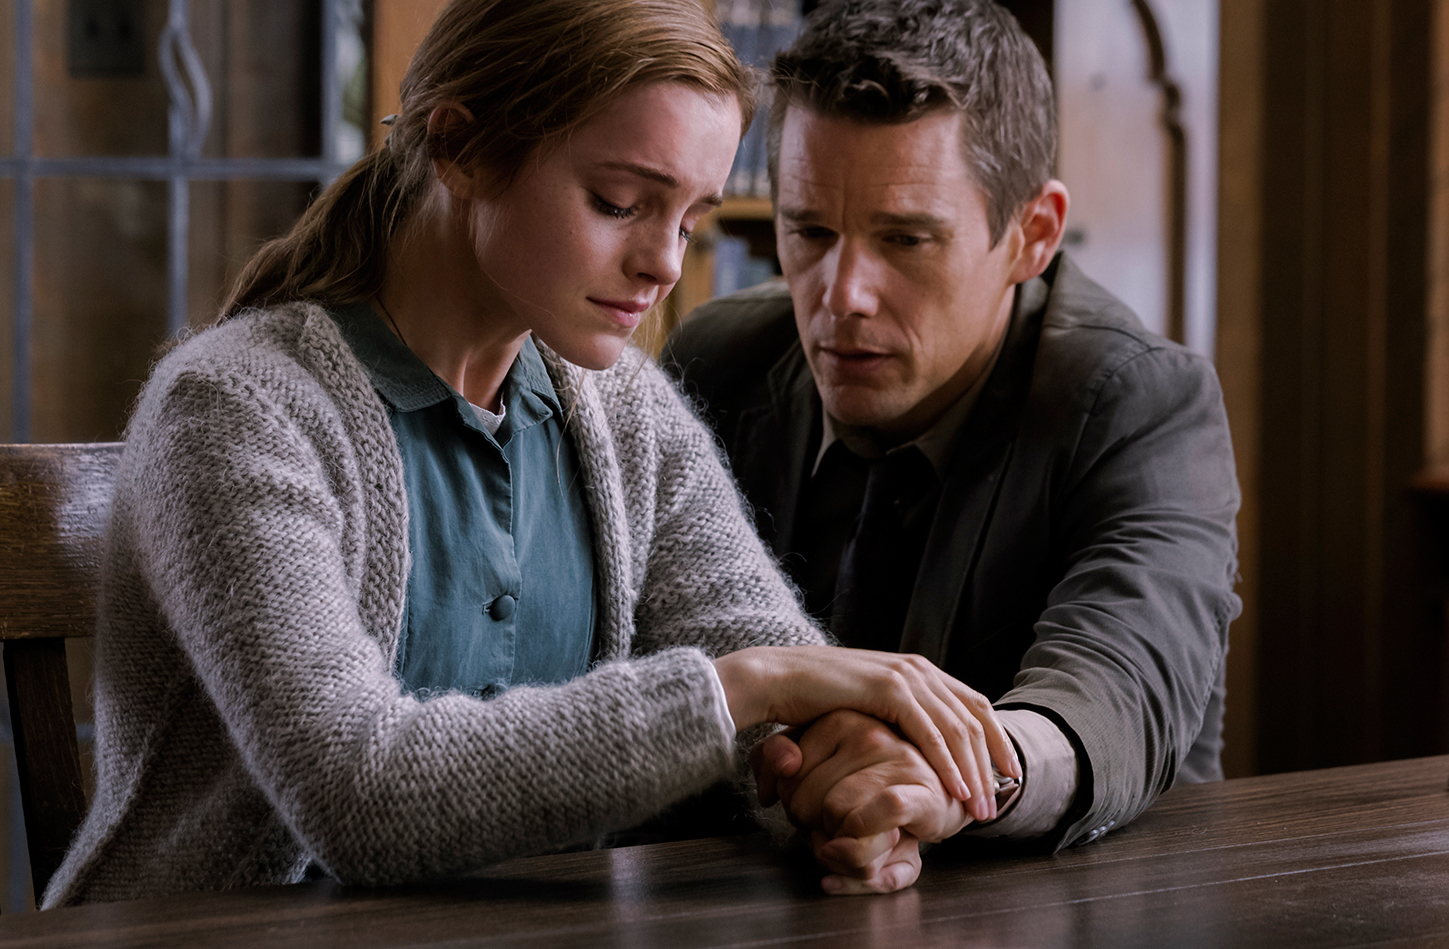 regression-official-trailer-starring-emma-watson-and-ethan-hawke-001